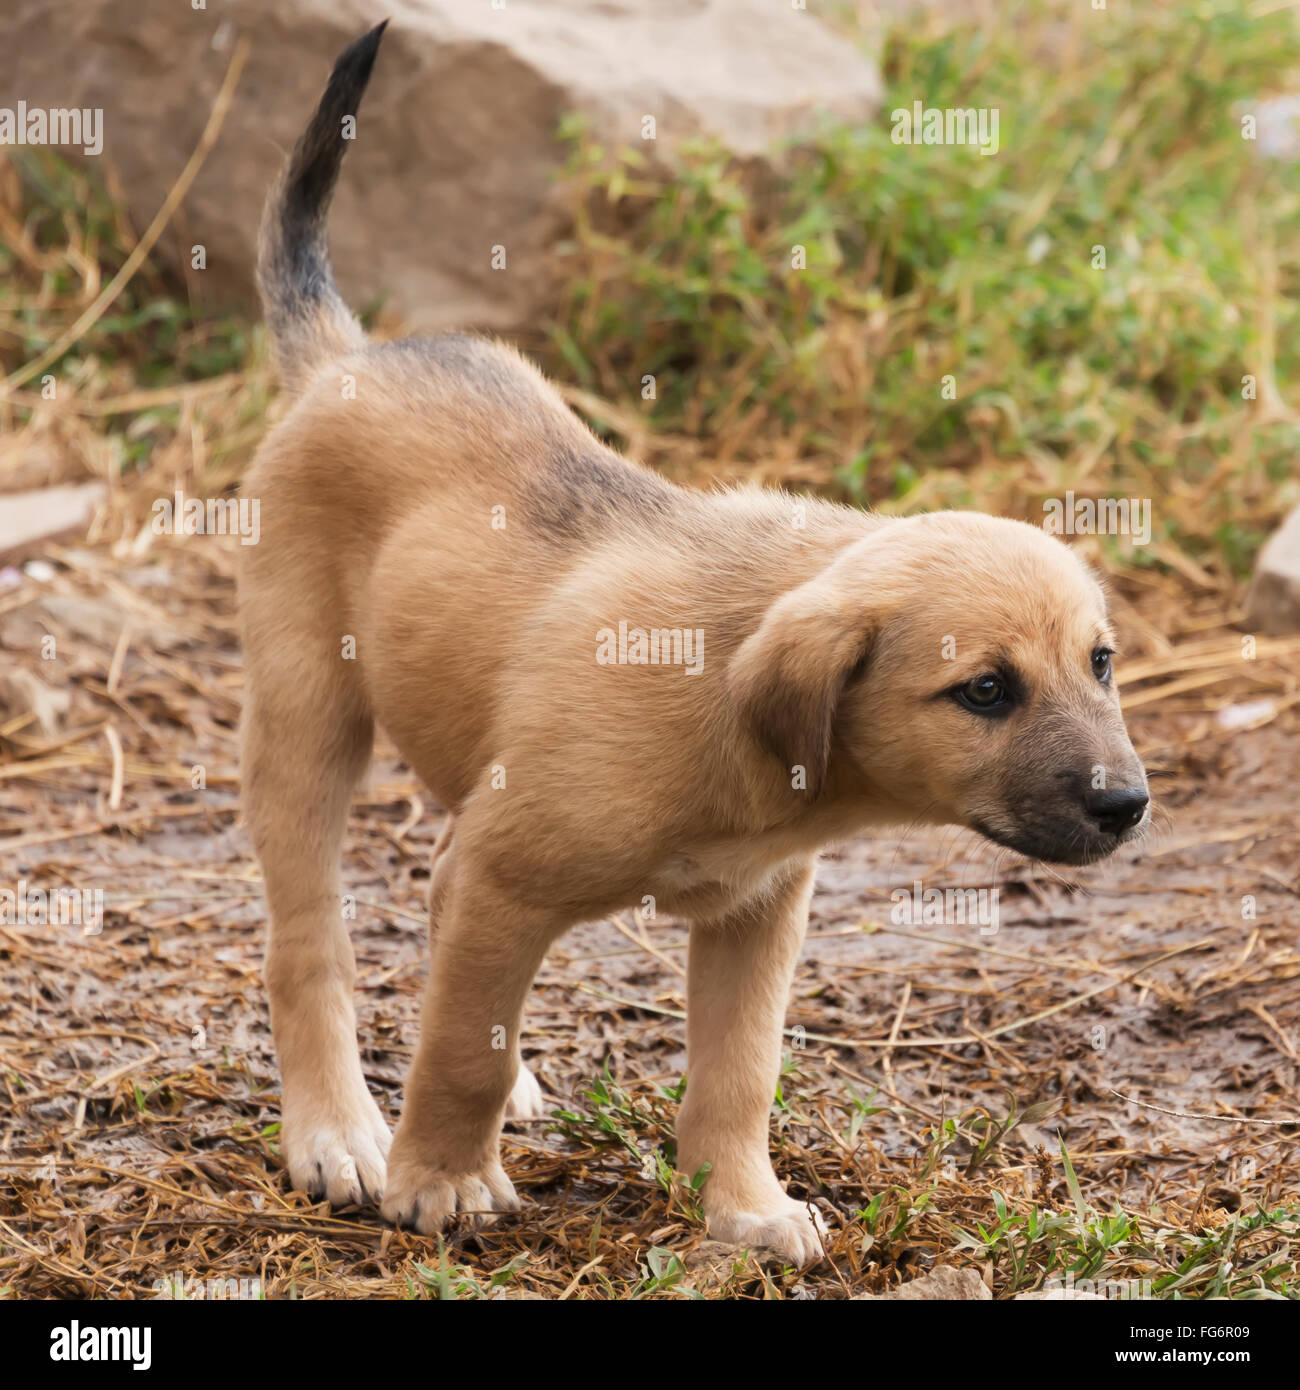 A brown puppy with a black muzzle is stretching its head forwards beside a pile of rocks, looking for something off camera; Kenya Stock Photo